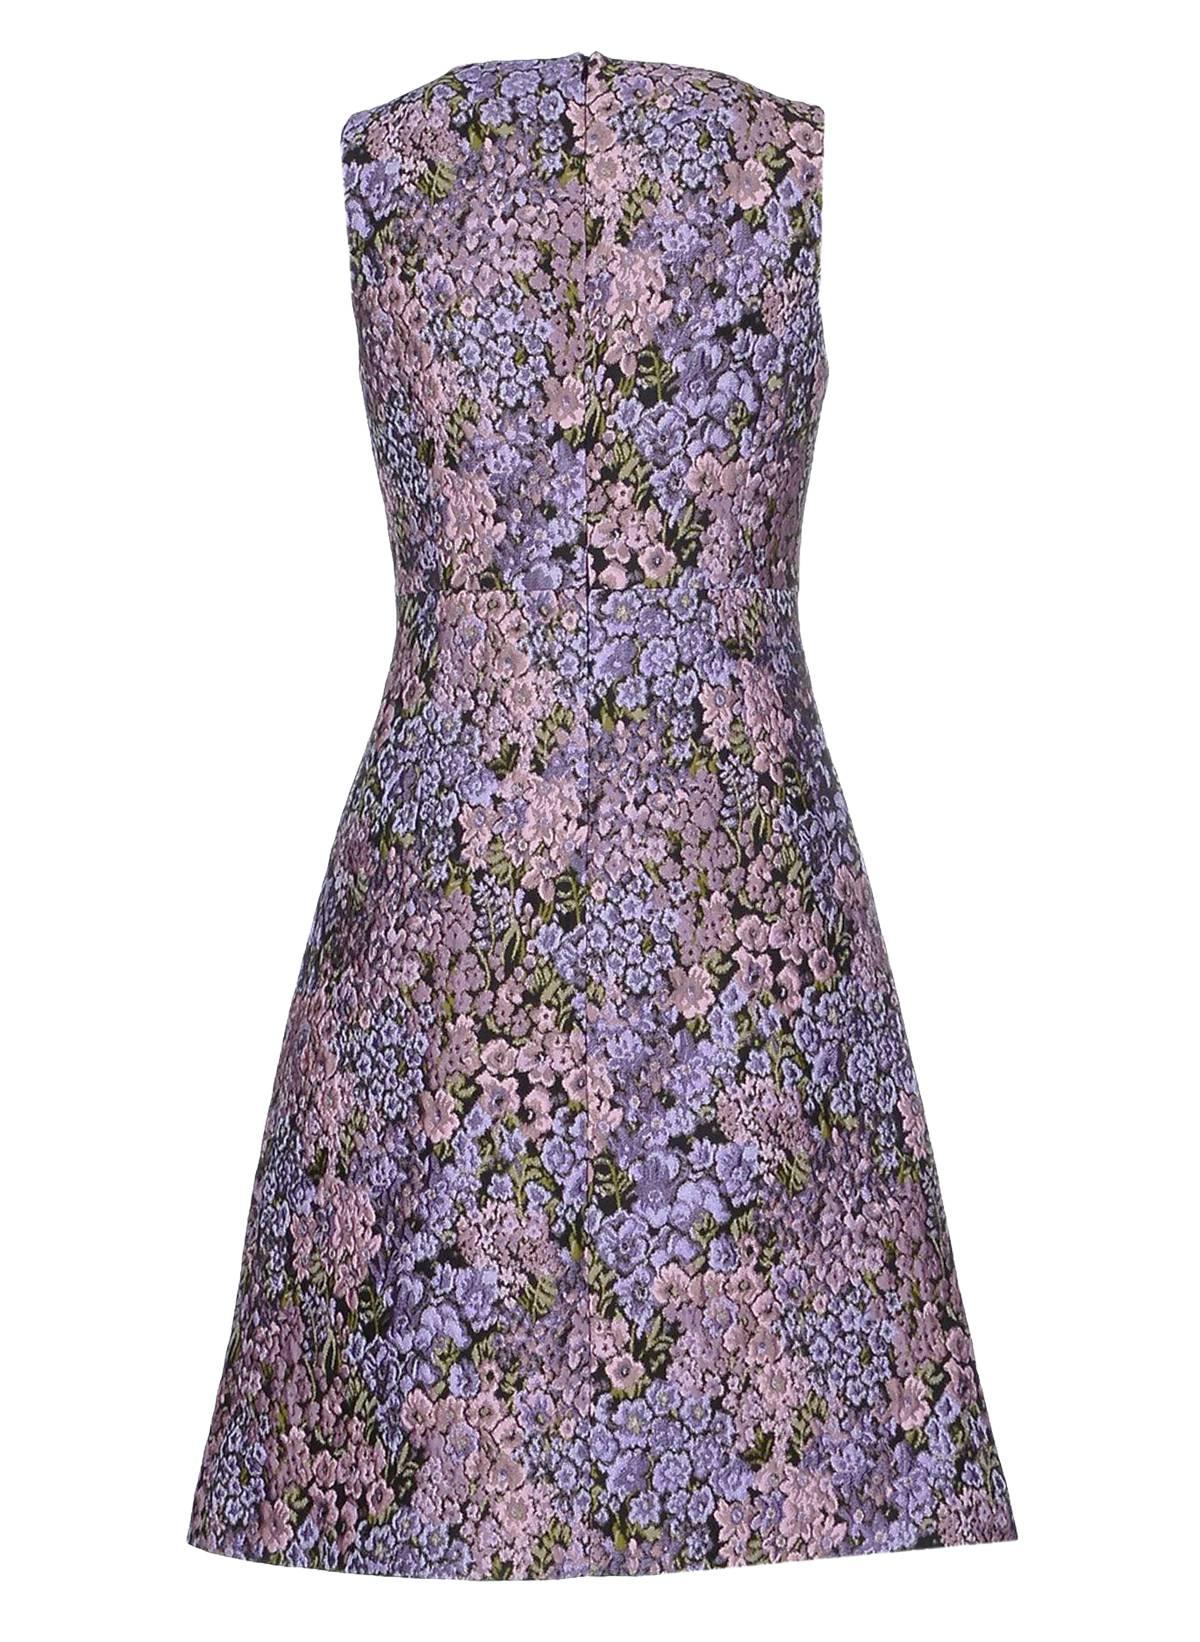 New MICHAEL KORS Floral Dress
Designer Size 12
Colors - Lilac, Pink, Green on Black Background
Back Side Zip Closure
Fully Lined
Measurements: Length - 40 inches, Waist - 33